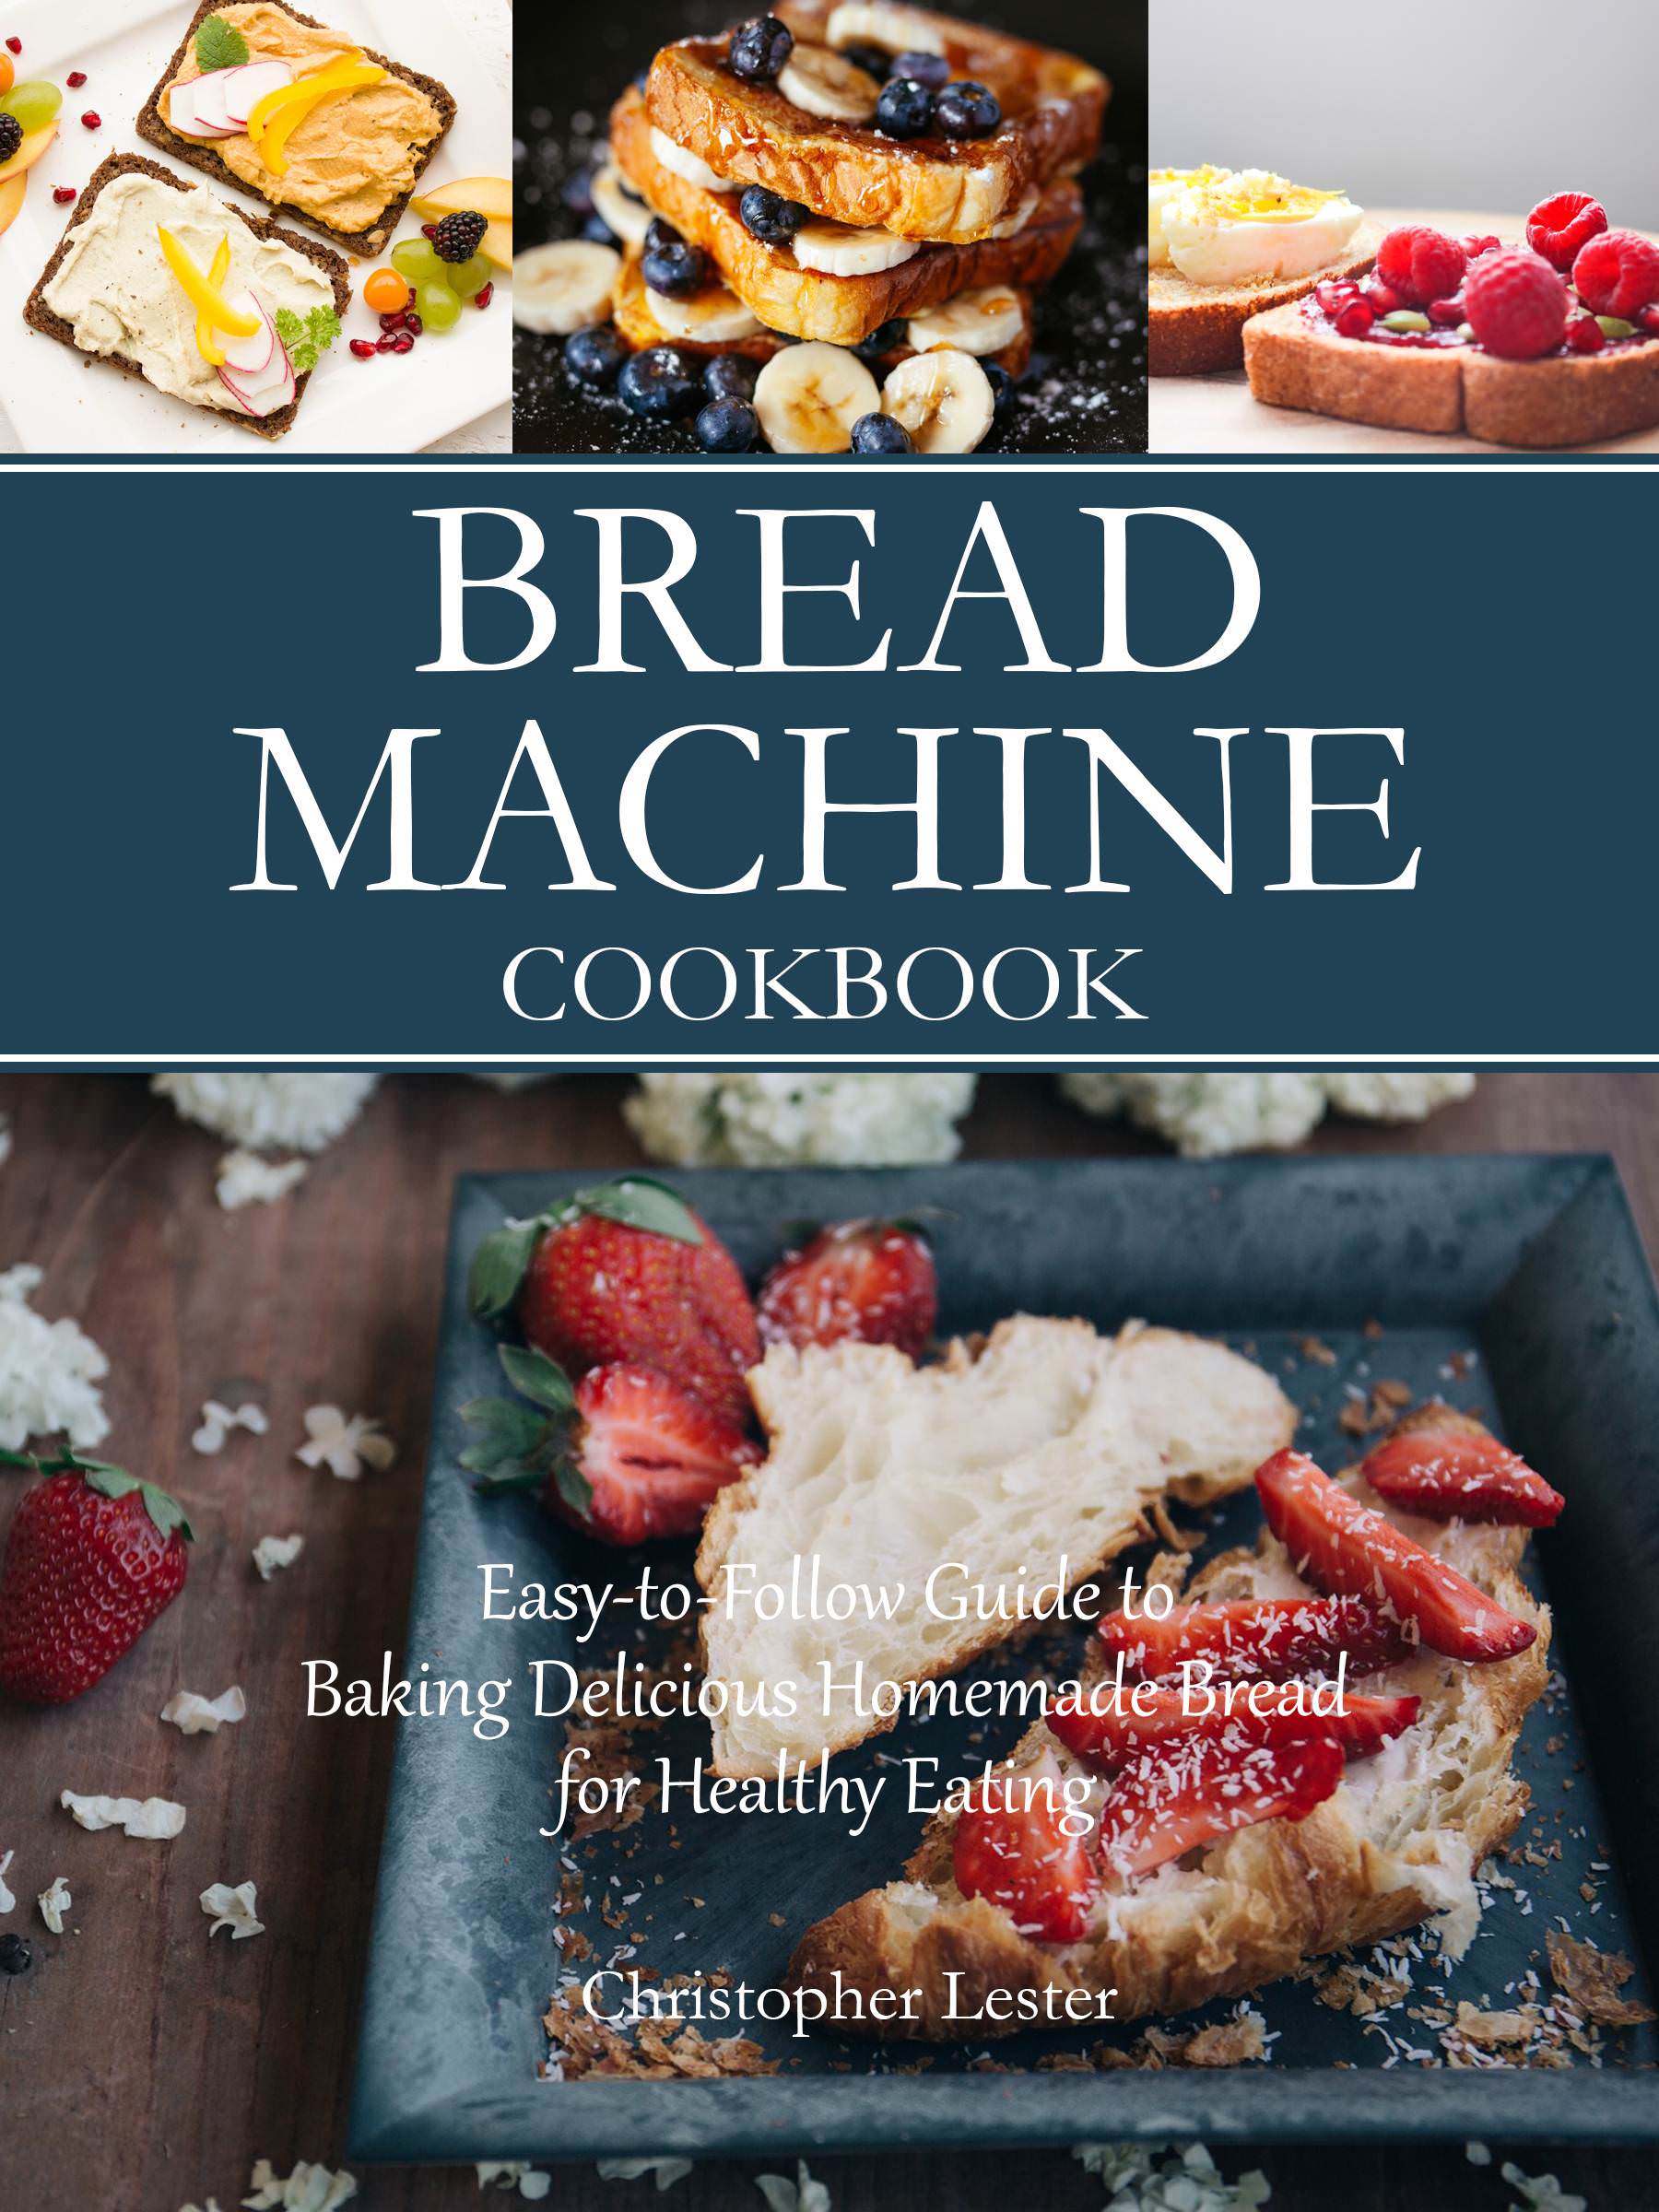 FREE: Bread Machine Cookbook: Easy-to-Follow Guide to Baking Delicious Homemade Bread for Healthy Eating by Christopher Lester